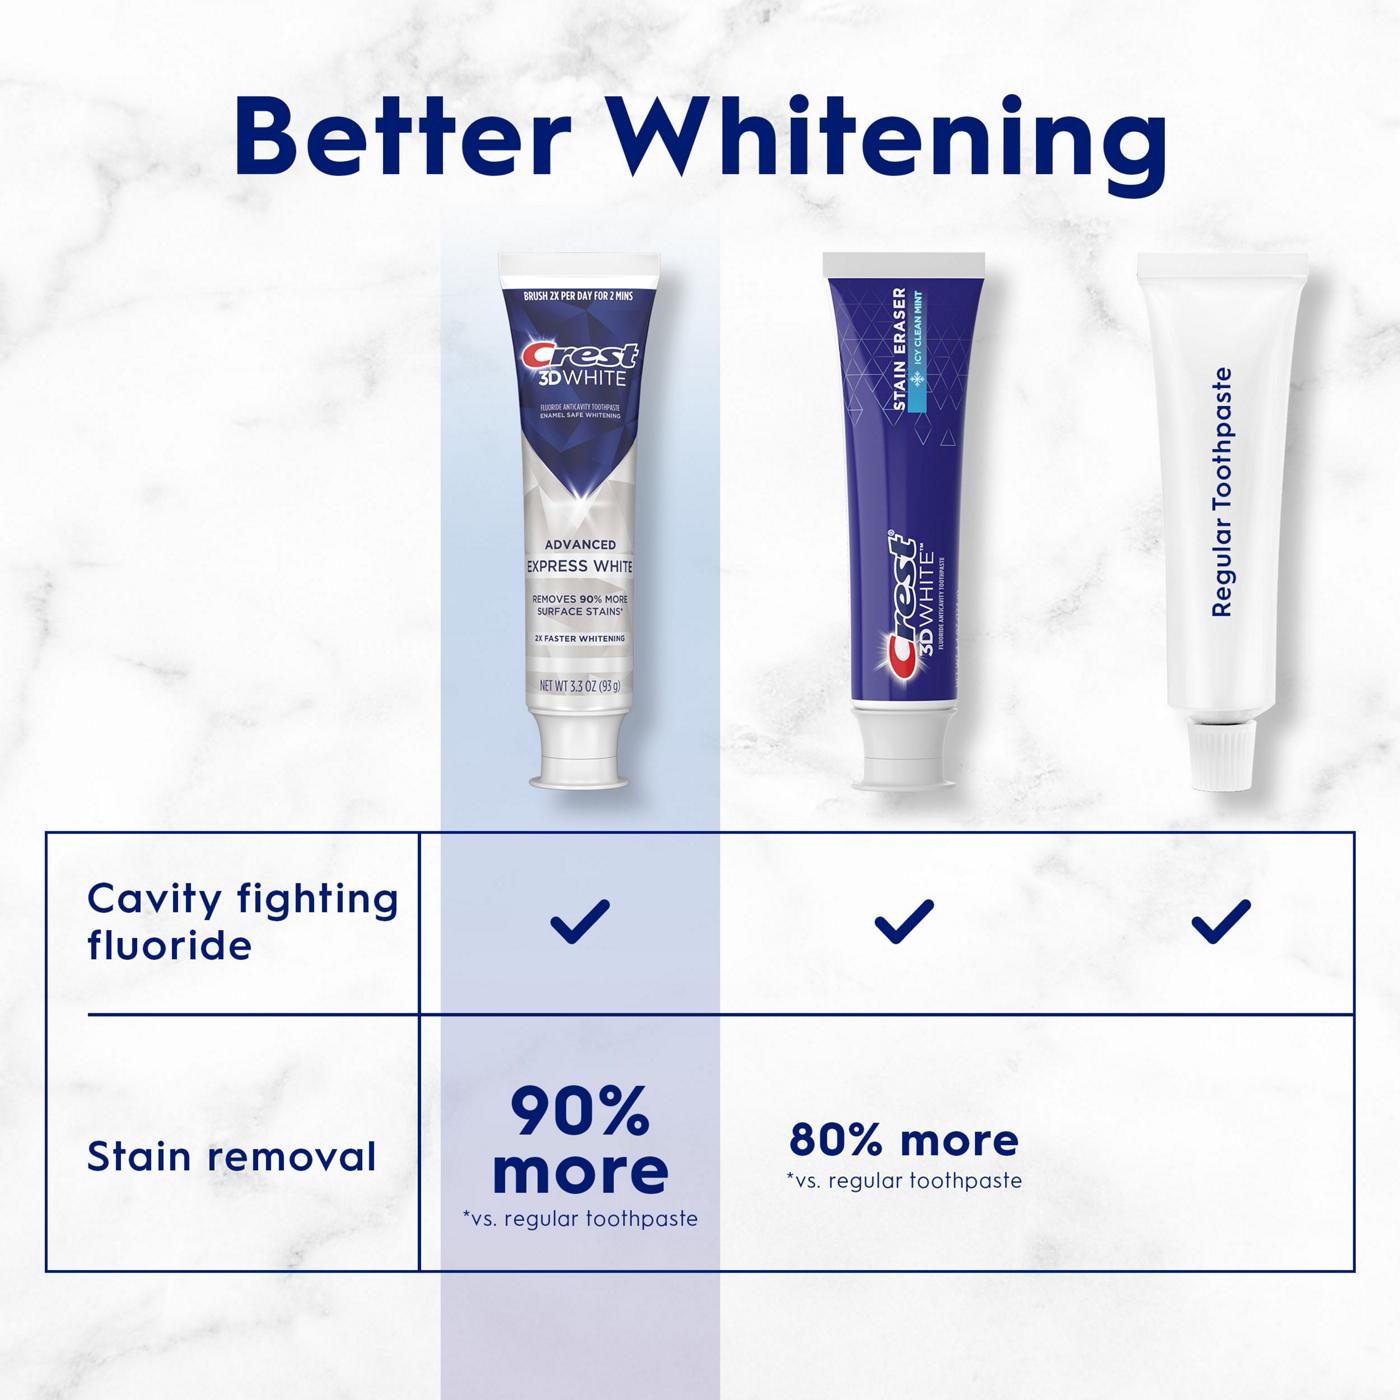 Crest 3D White Advanced Whitening Toothpaste - Express White; image 6 of 16